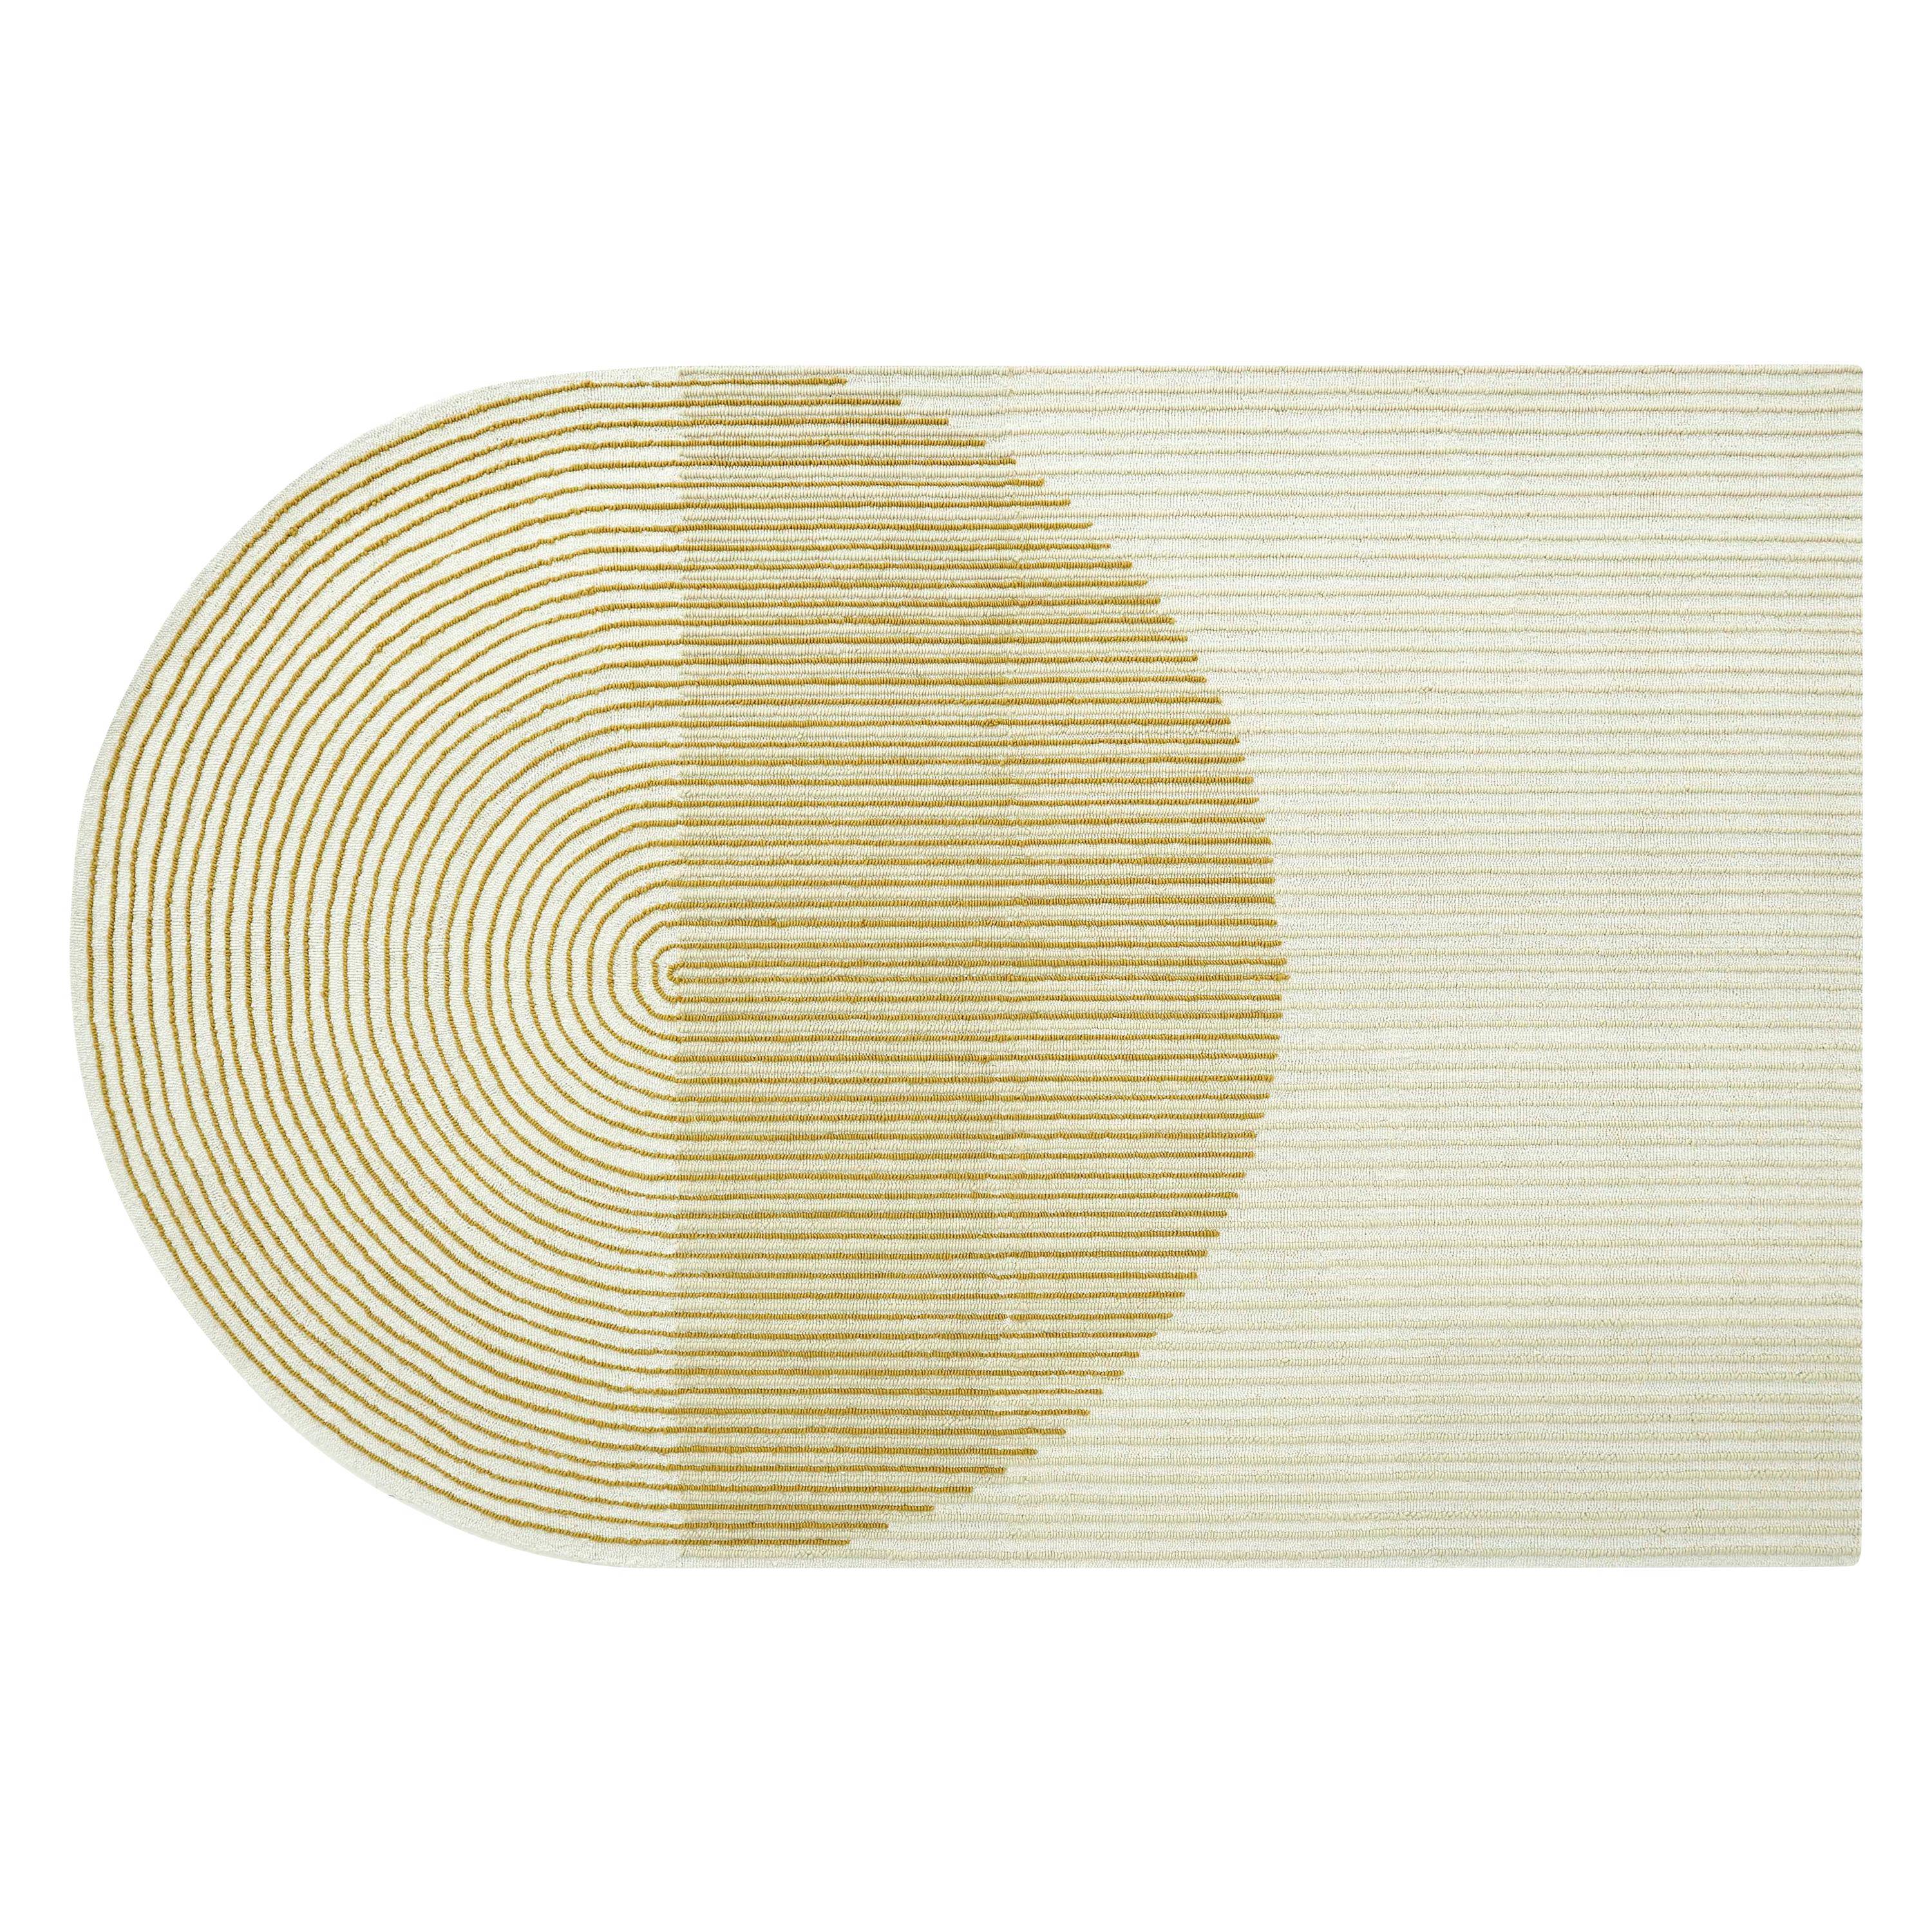 GAN Hand Tufted Ply Rug in Yellow by MUT Design